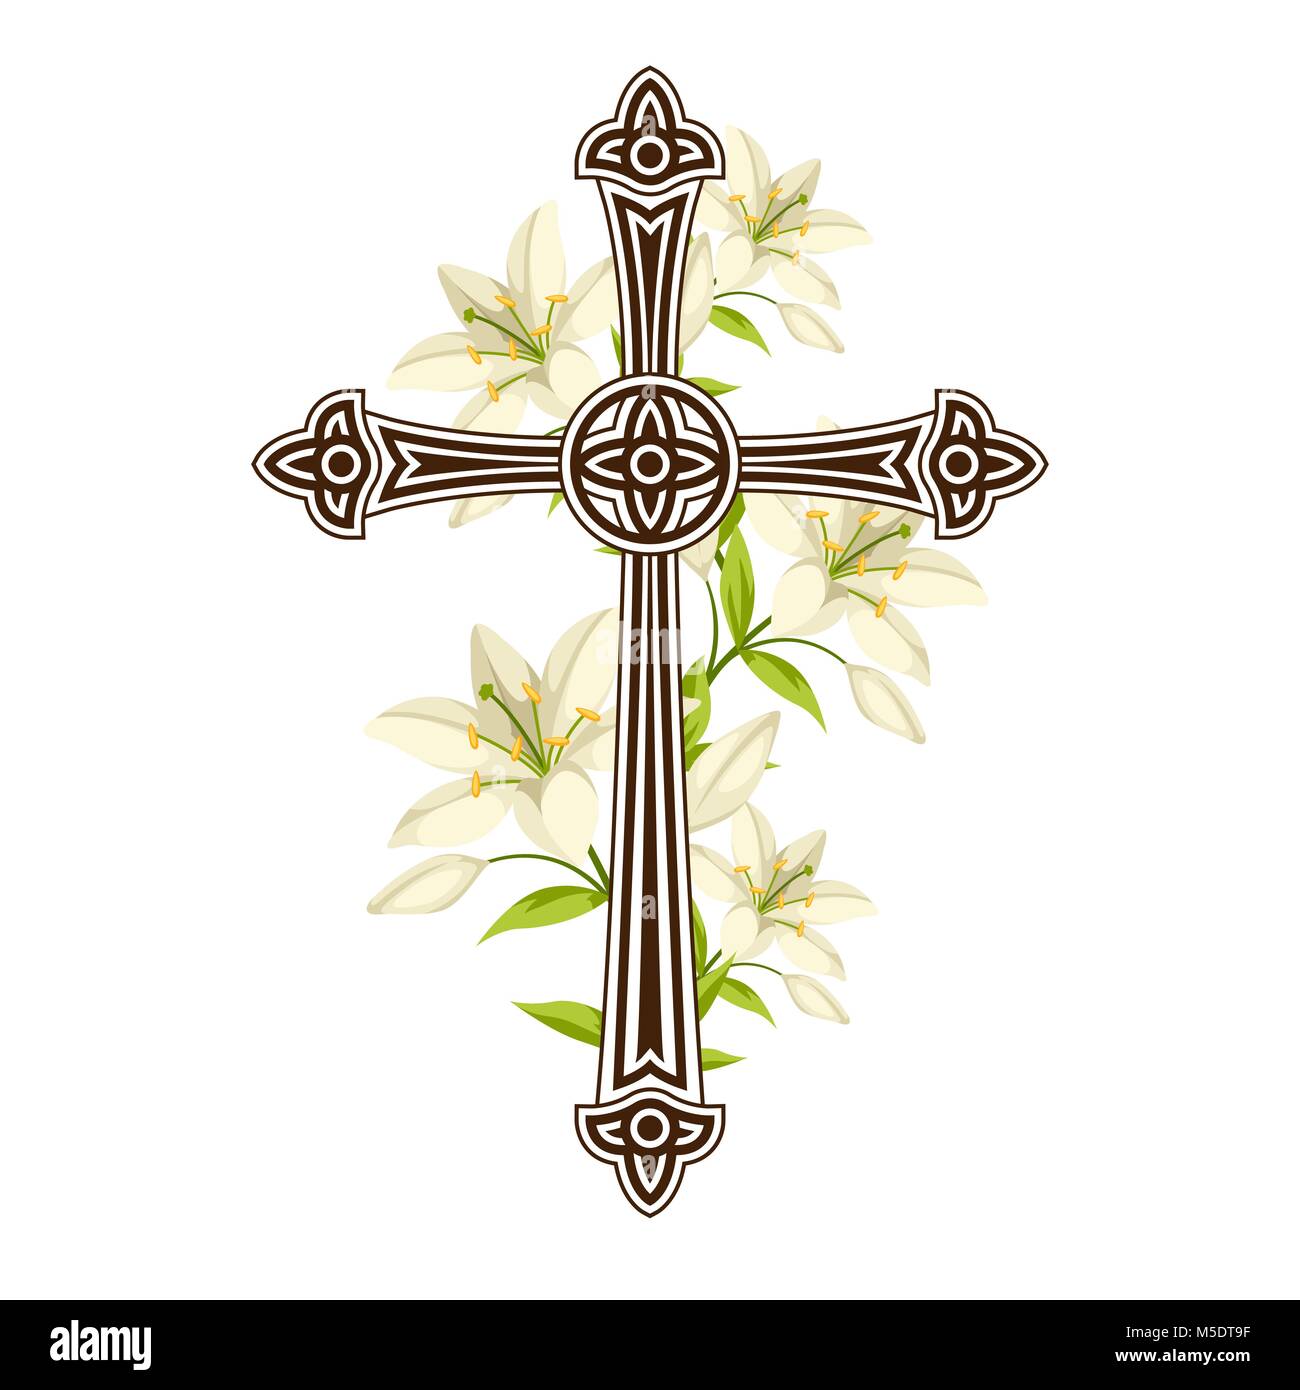 Silhouette of ornate cross with lilies. Happy Easter concept illustration or greeting card. Religious symbols of faith Stock Vector